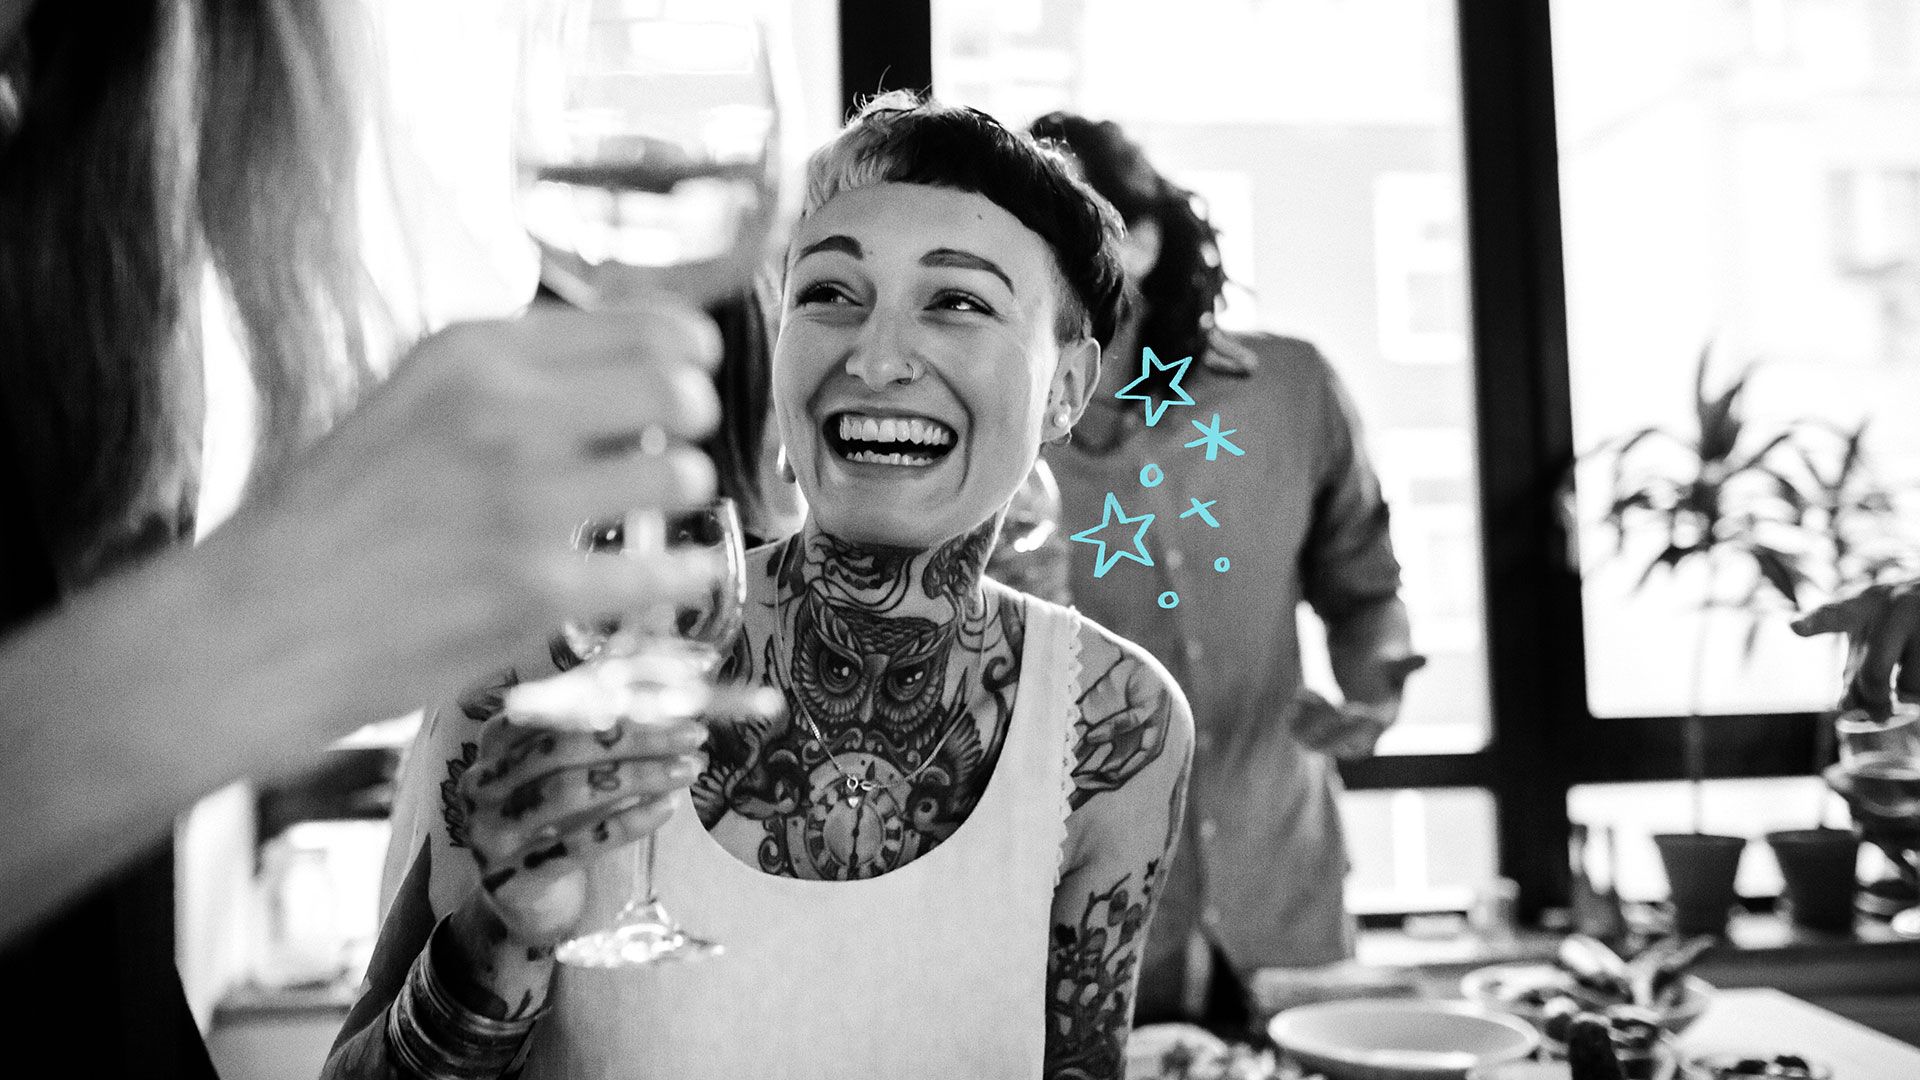 An image of a Mo Sister holding a wine glass and having a good time with a friend.